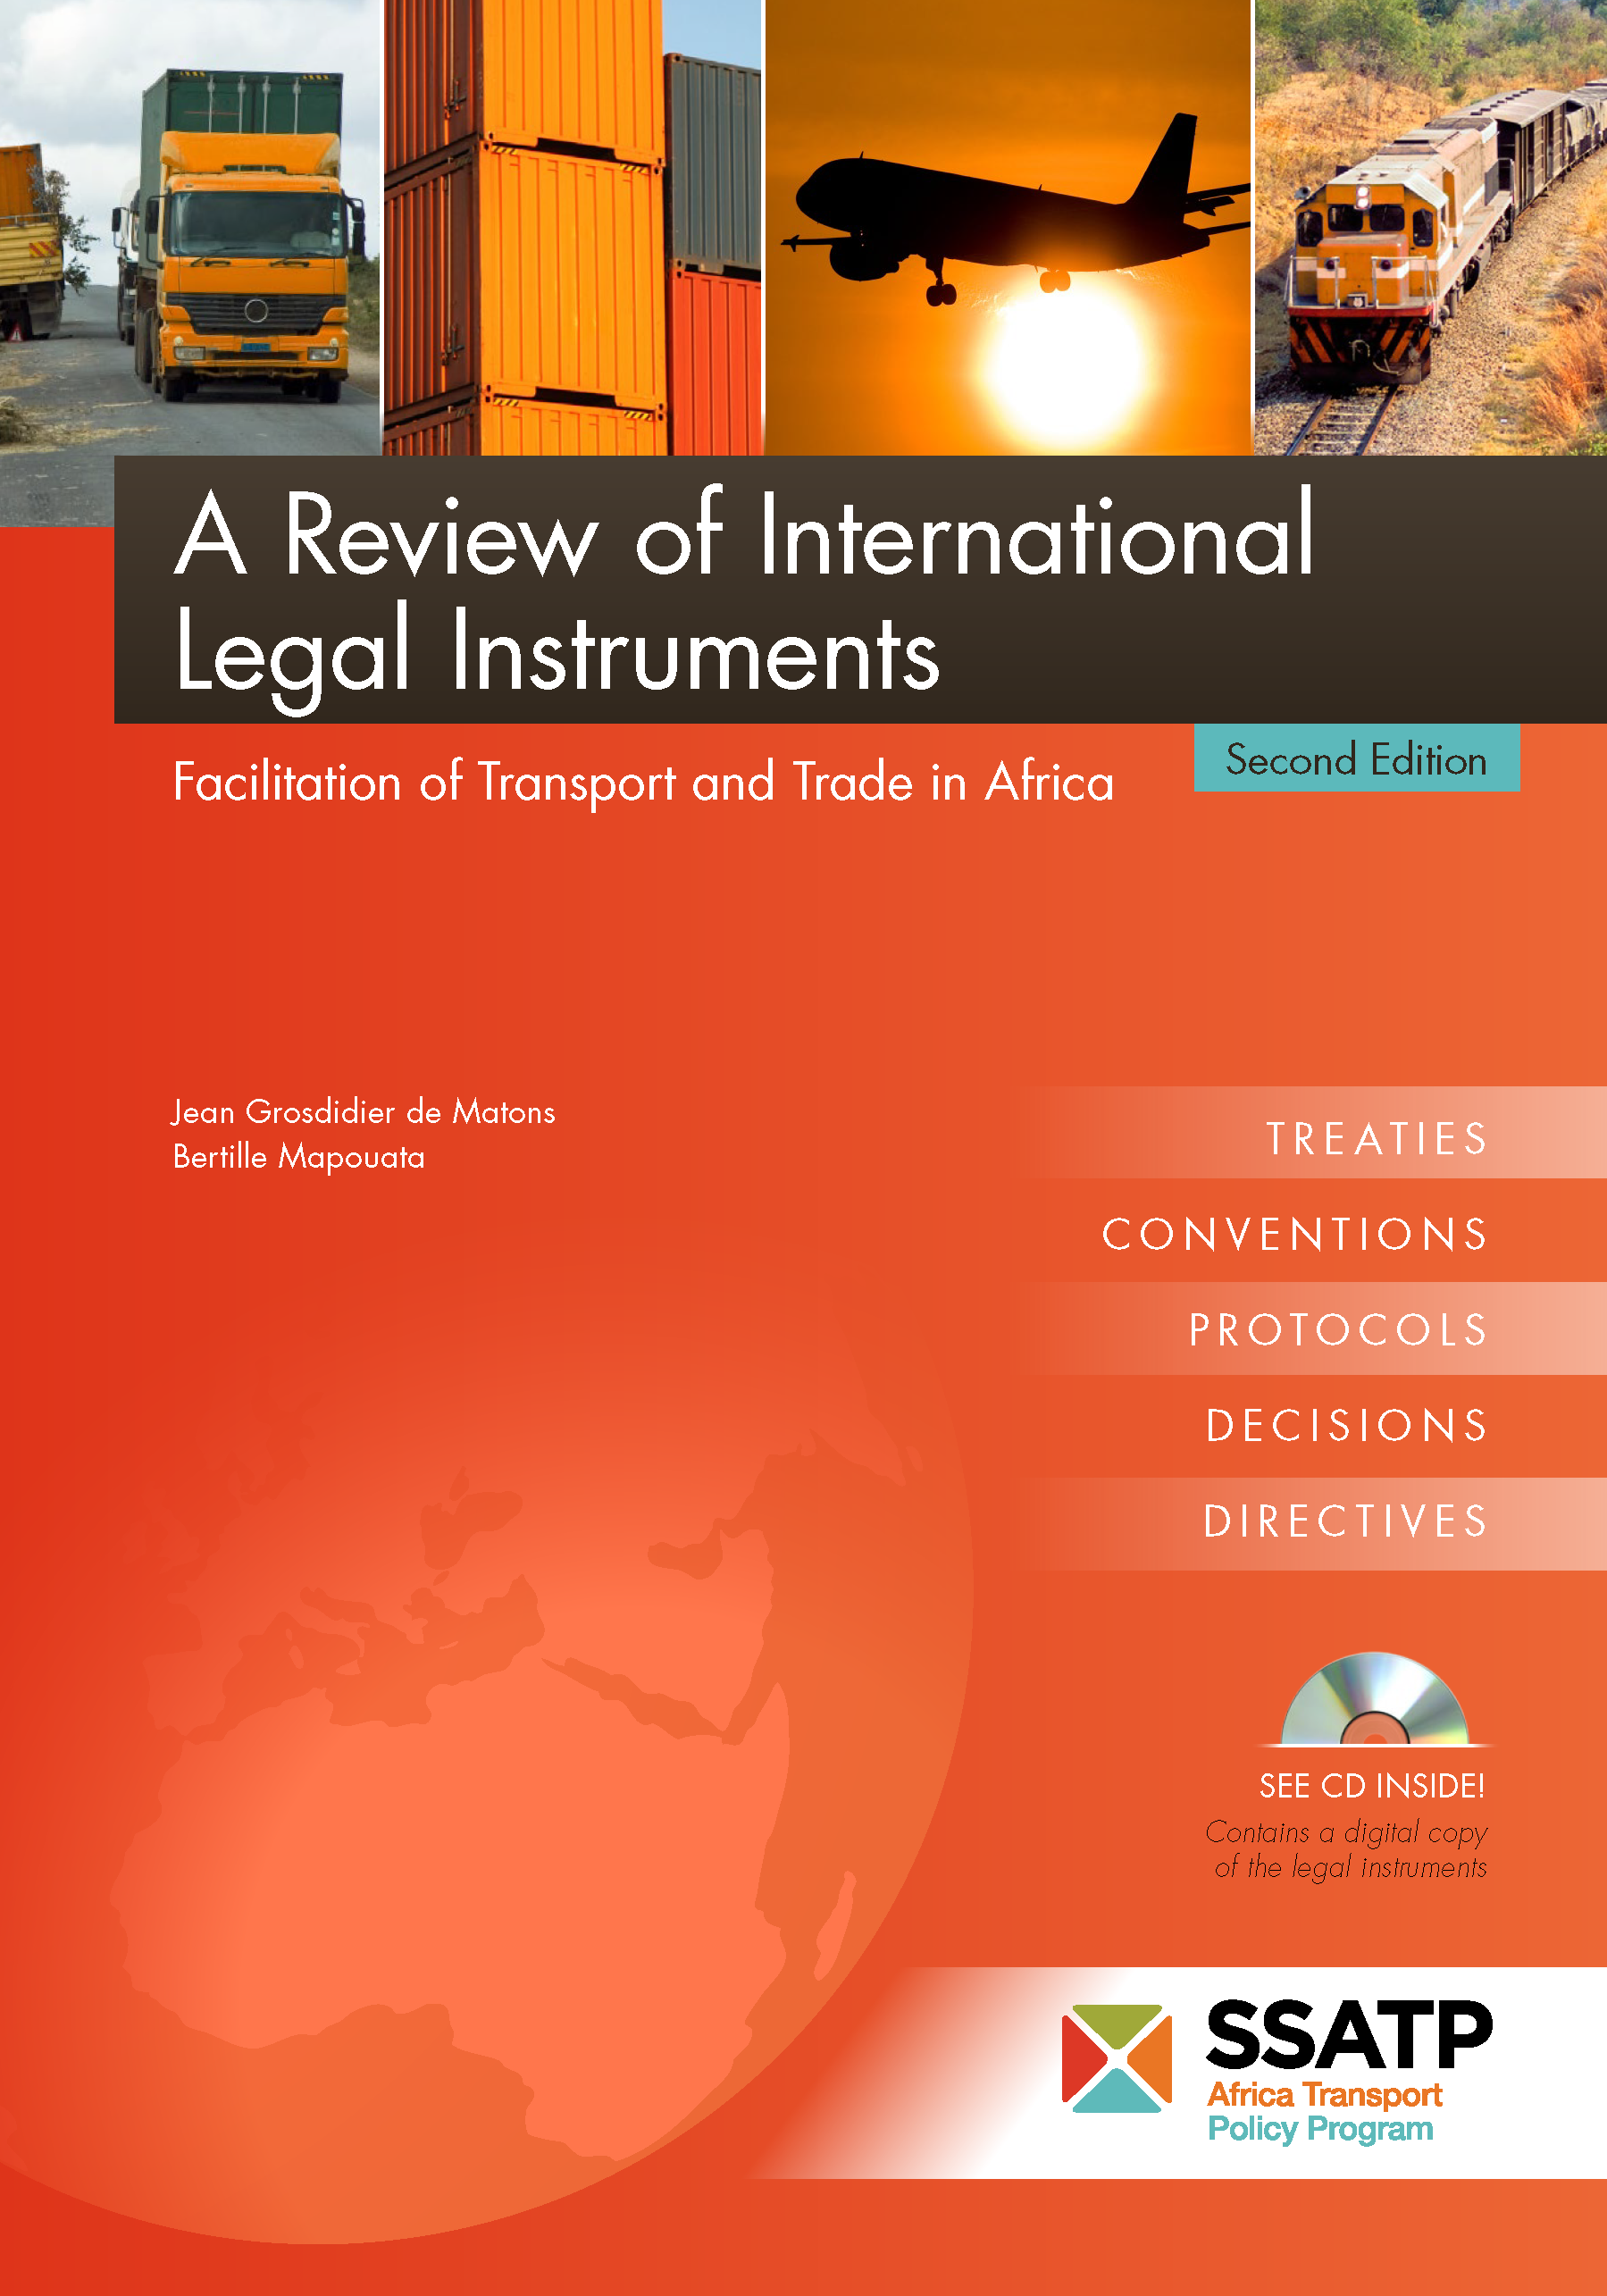 A Review of International Legal Instruments: Facilitation of Transport and Trade in Africa